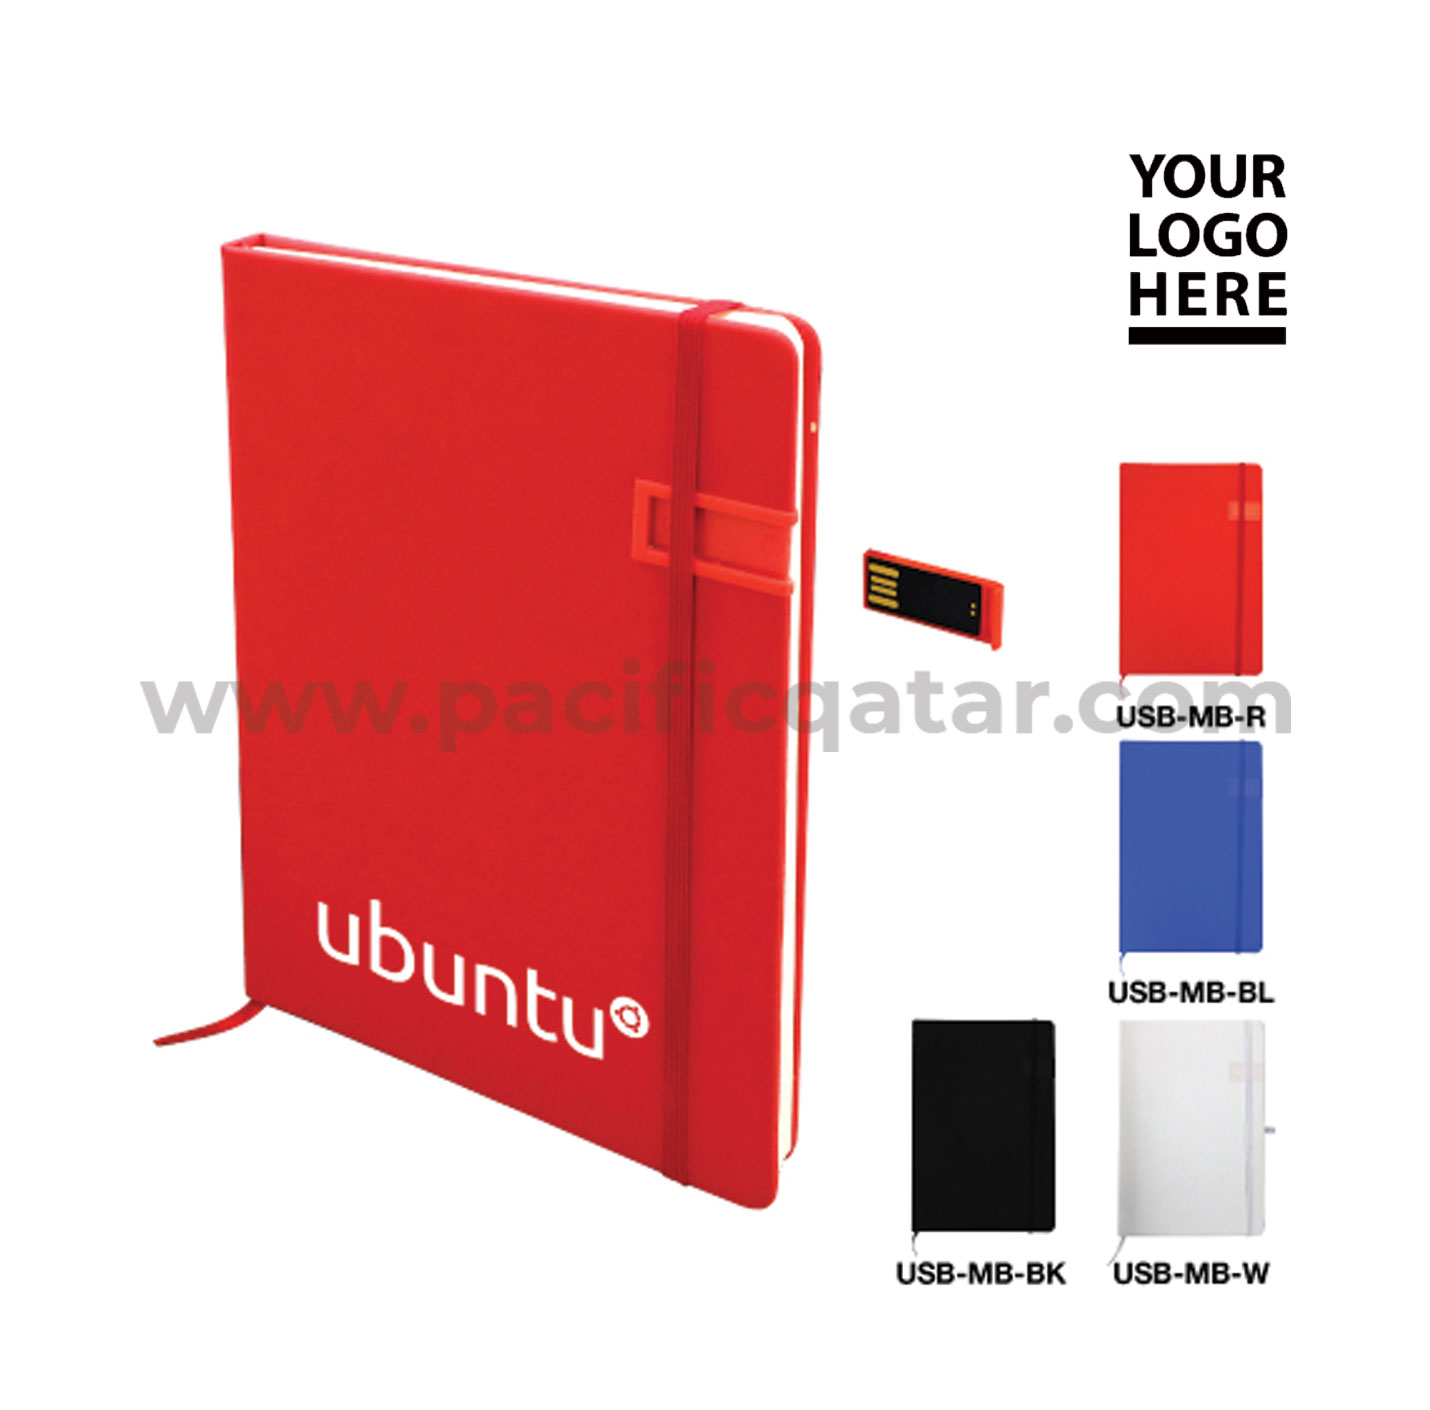 Notebook with USB Flash Drive